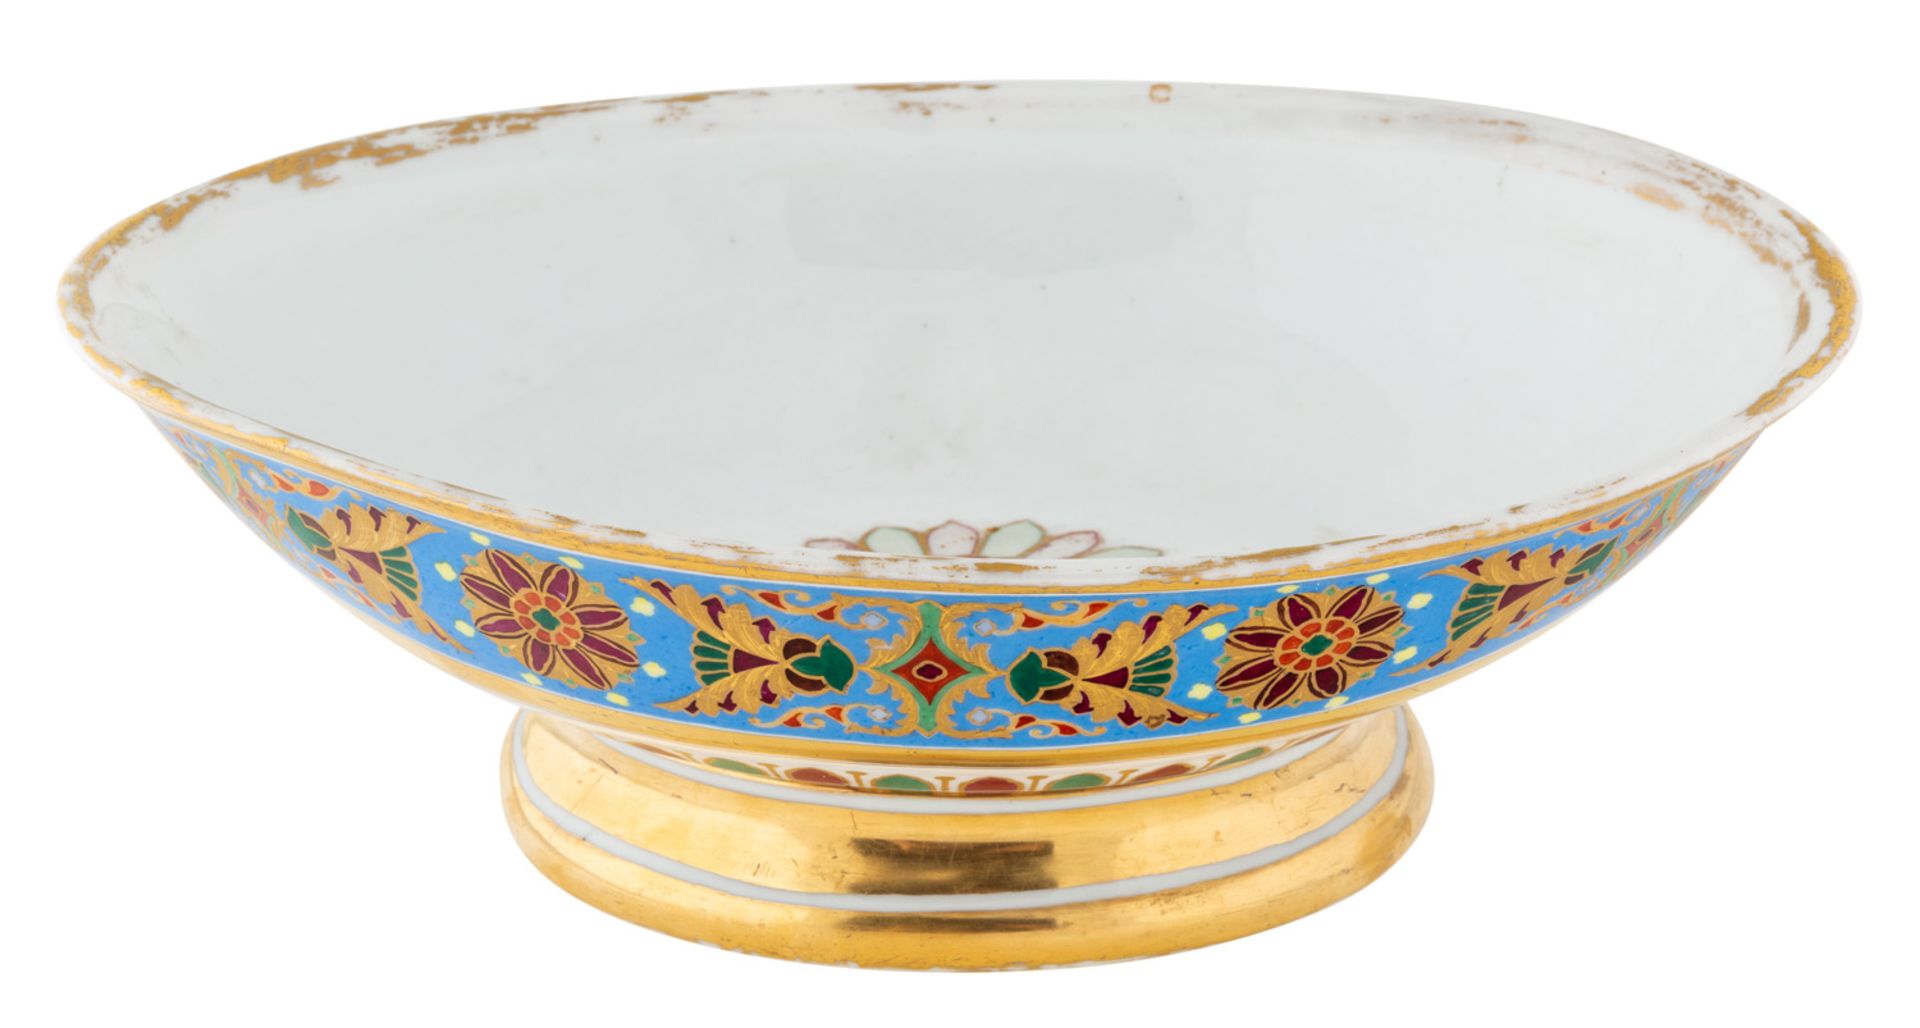 A RUSSIAN PORCELAIN BOWL, IMPERIAL PORCELAIN FACTORY, ST. PETERSBURG, PERIOD OF ALEXANDER II